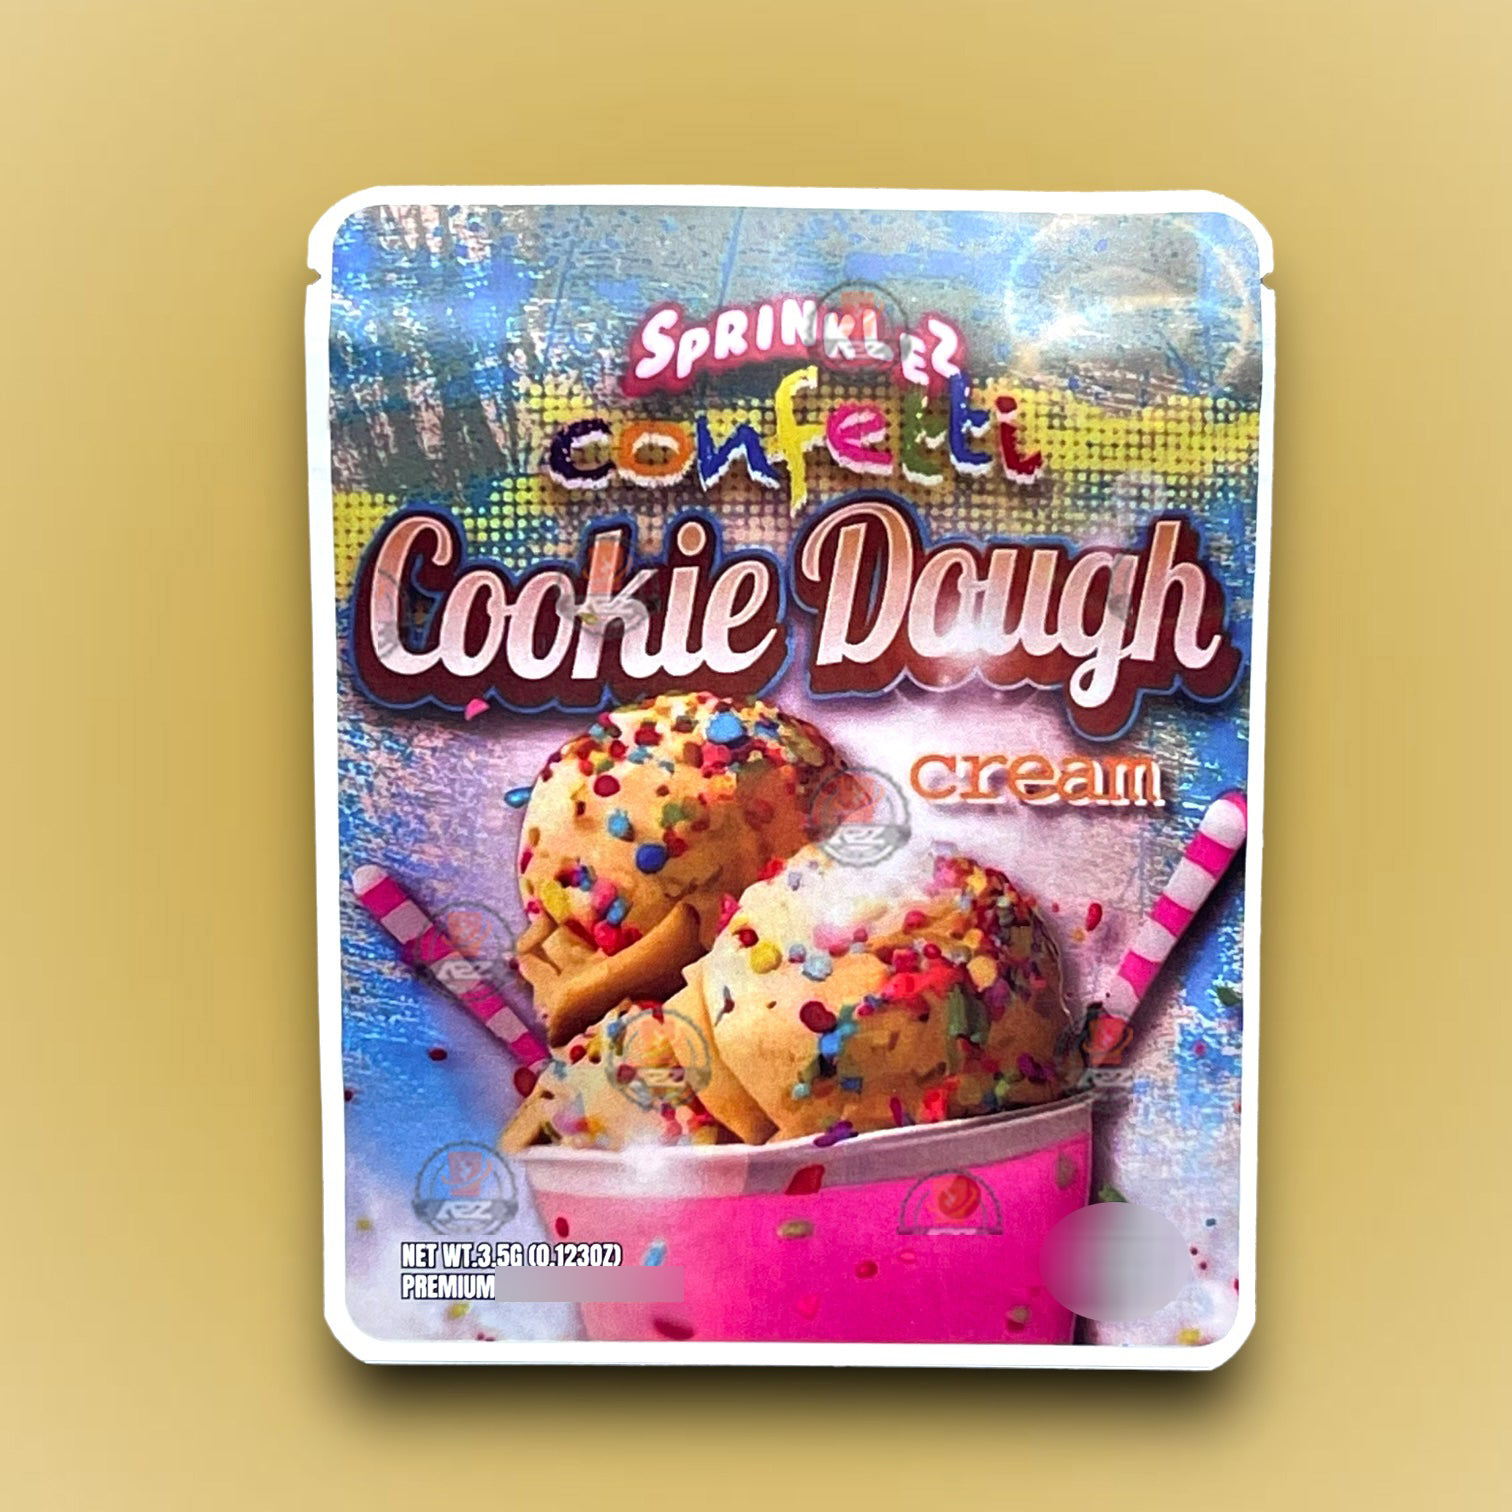 Sprinklez Confetti Cookies Dough Cream 3.5g Mylar Bags -With stickers and label